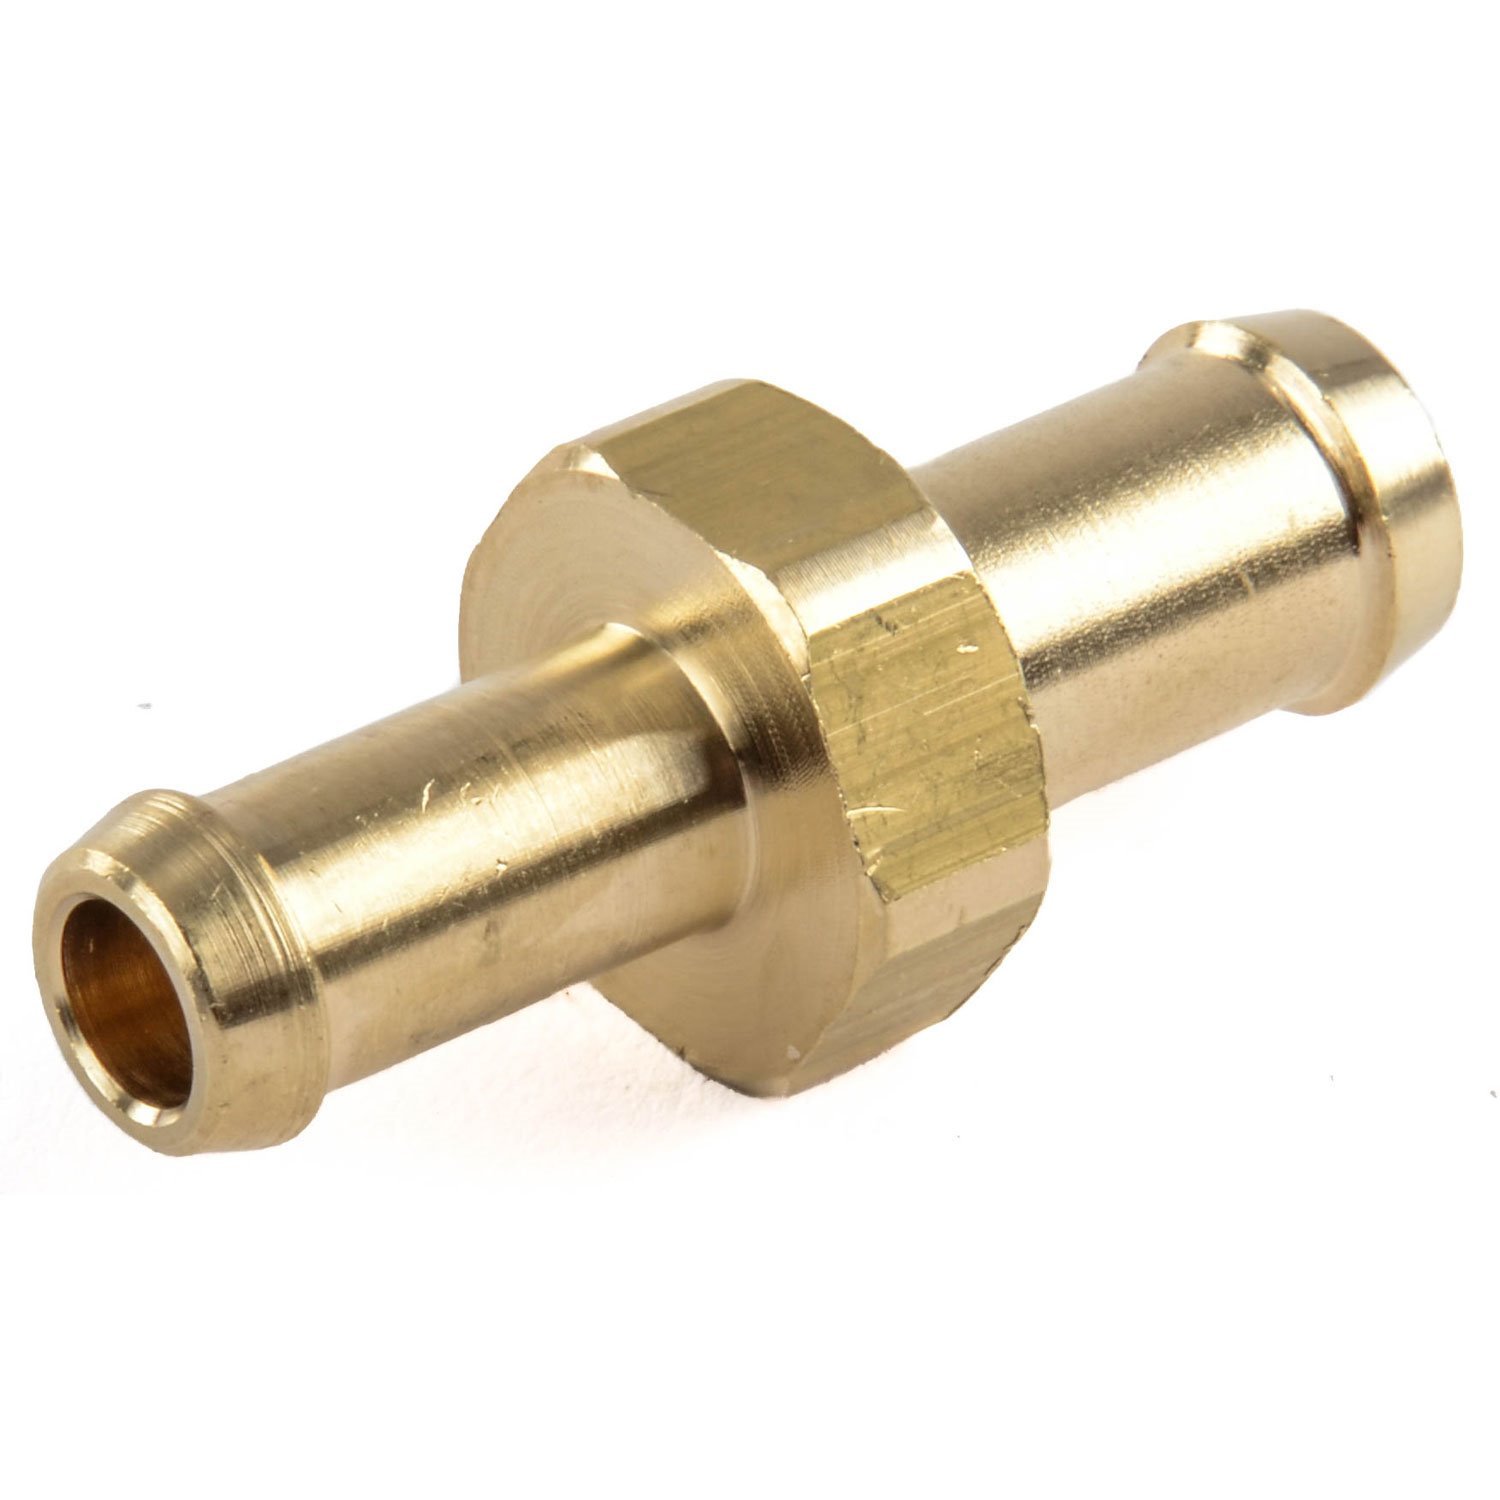 Brass Hose Adapter for 3/8 in. to 5/16